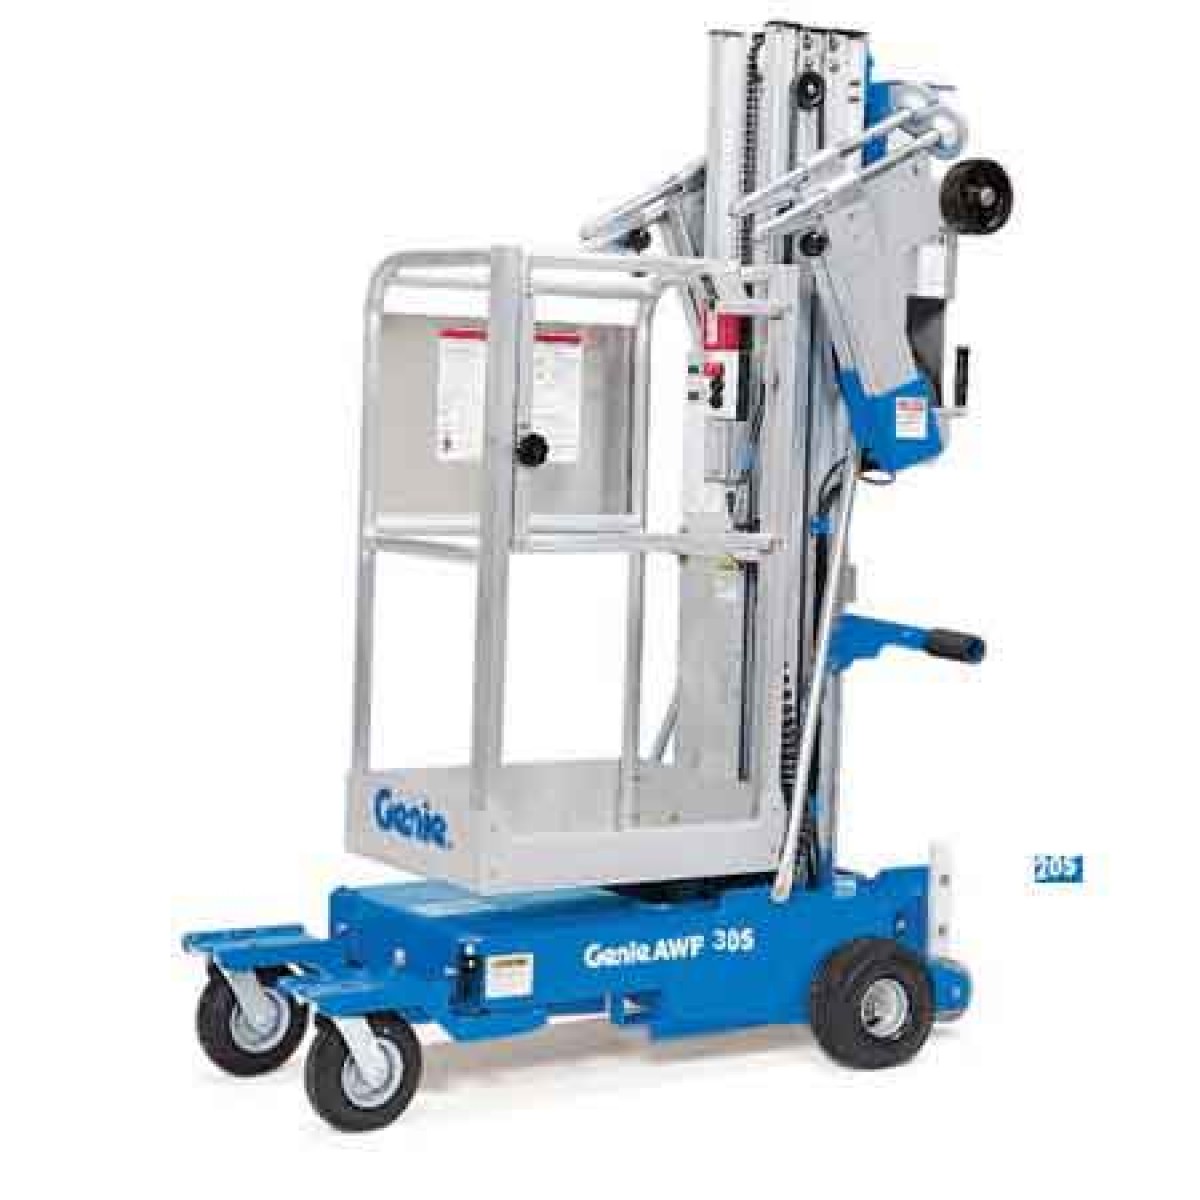 personnel lift rental from ace equipment rentals in snohomish, wa